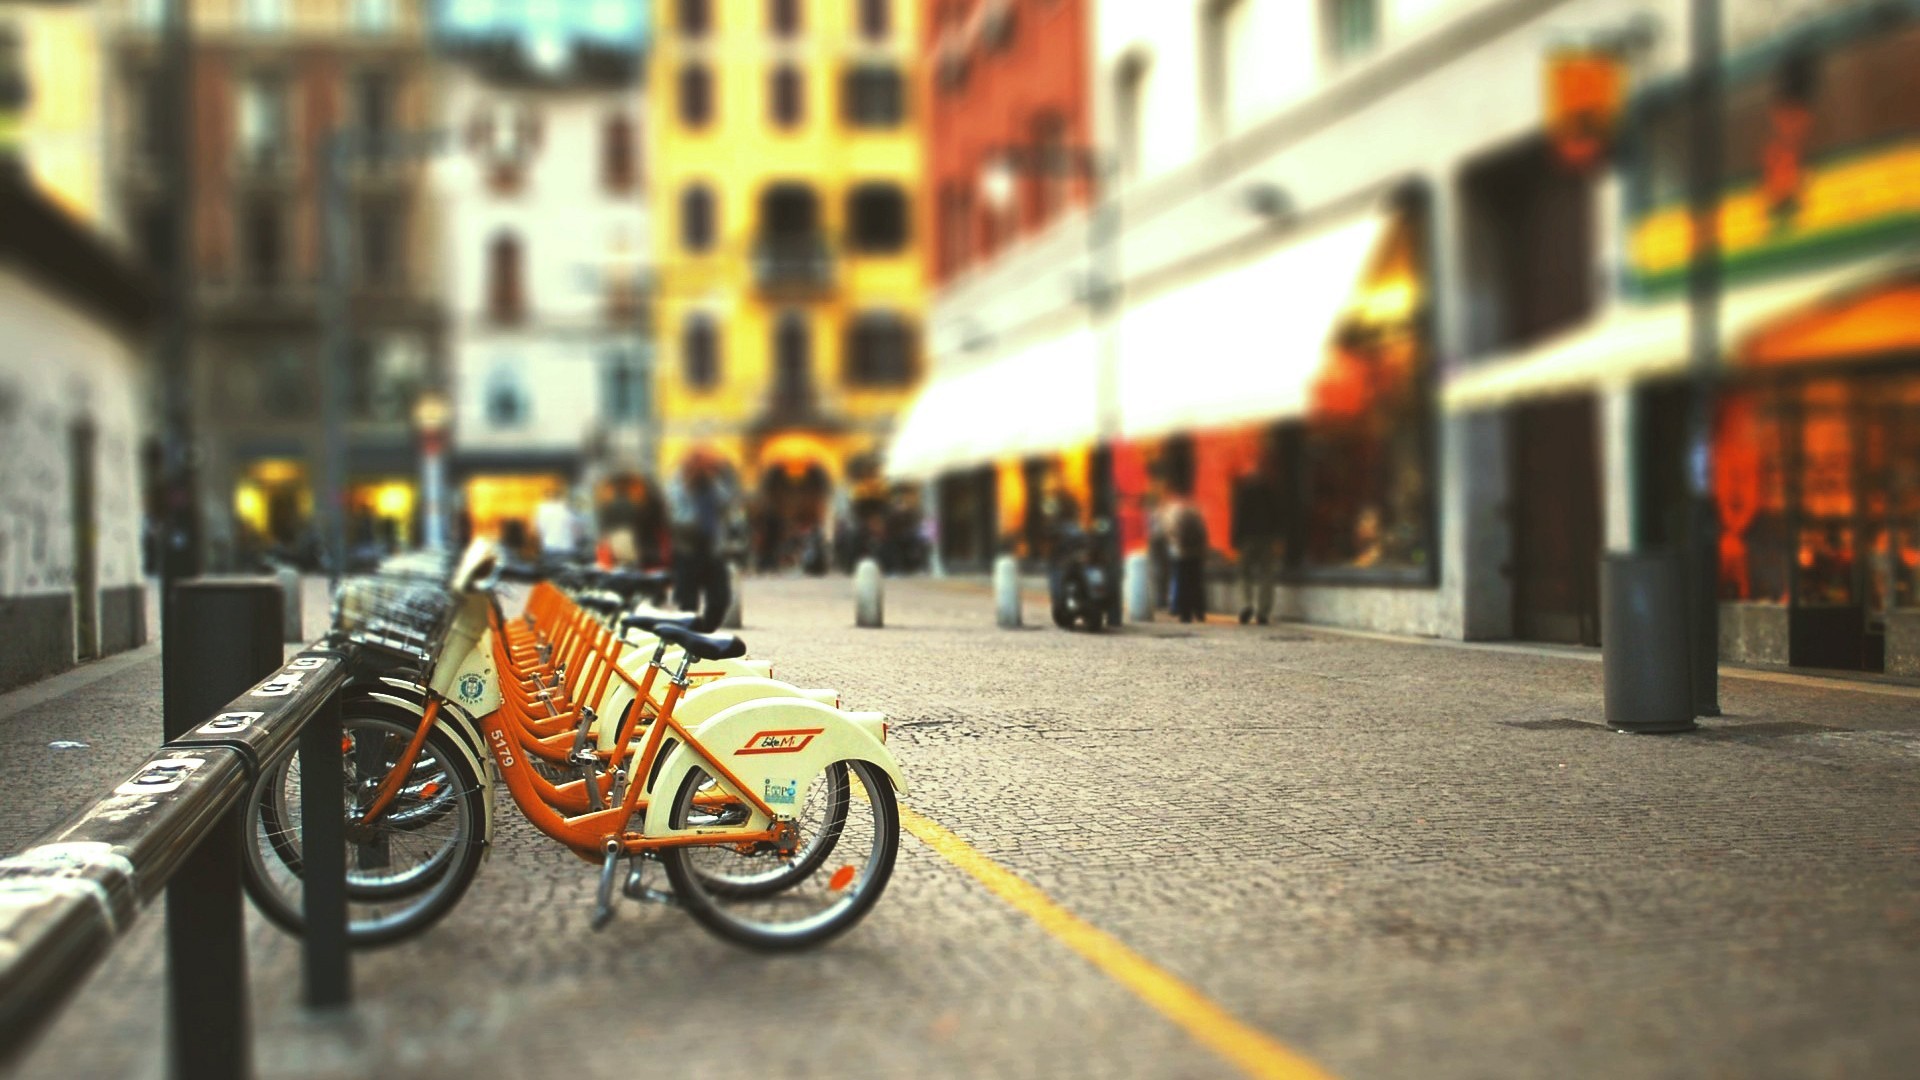 General 1920x1080 cityscape street bicycle urban depth of field cobblestone Milan Italy tilt shift vehicle outdoors